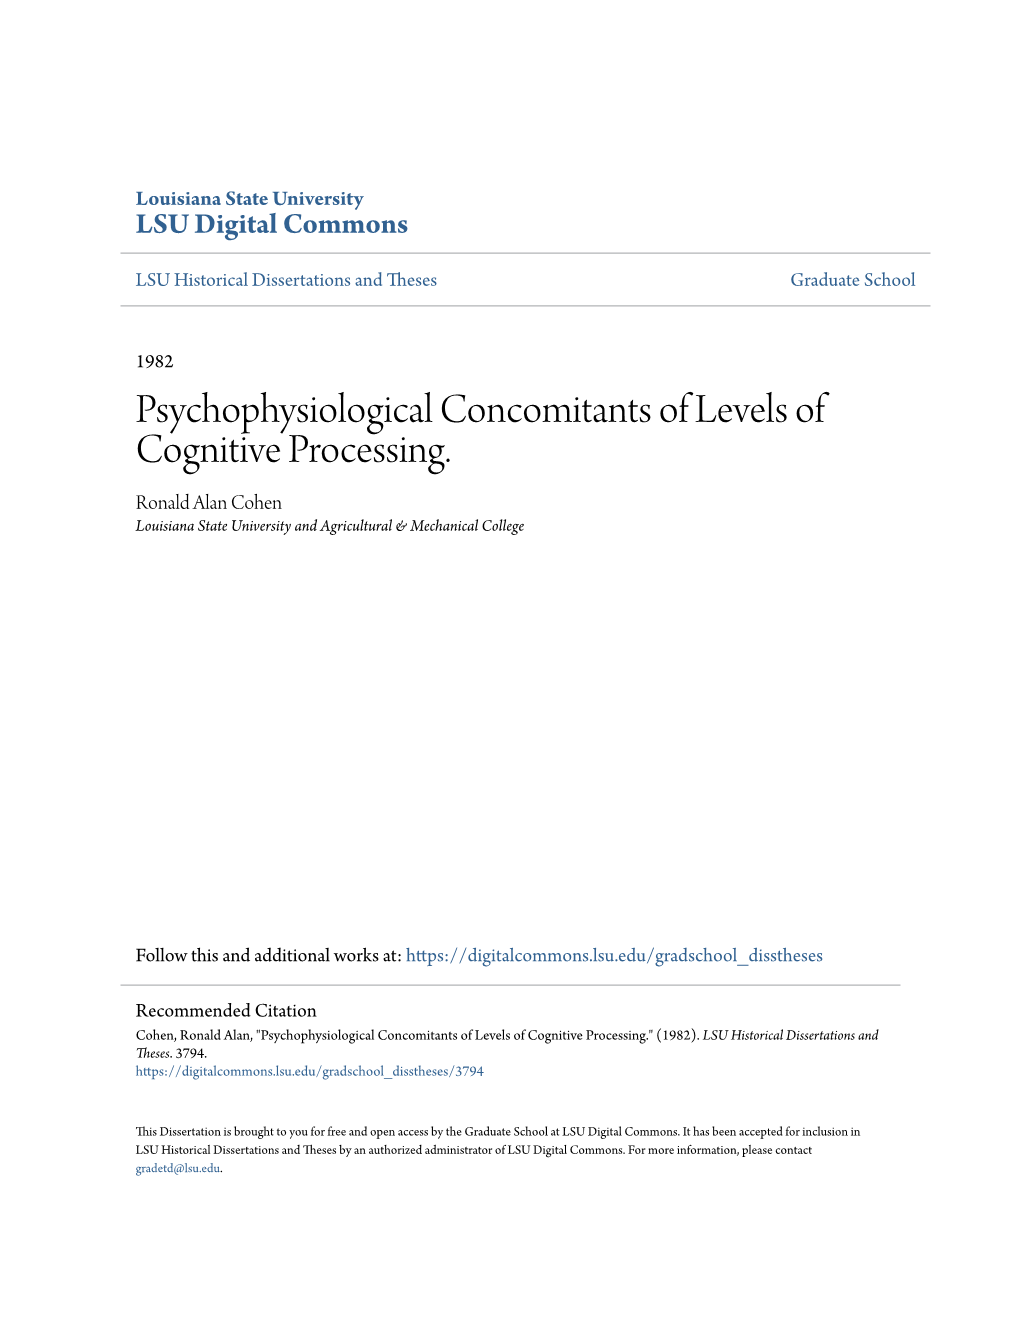 Psychophysiological Concomitants of Levels of Cognitive Processing. Ronald Alan Cohen Louisiana State University and Agricultural & Mechanical College